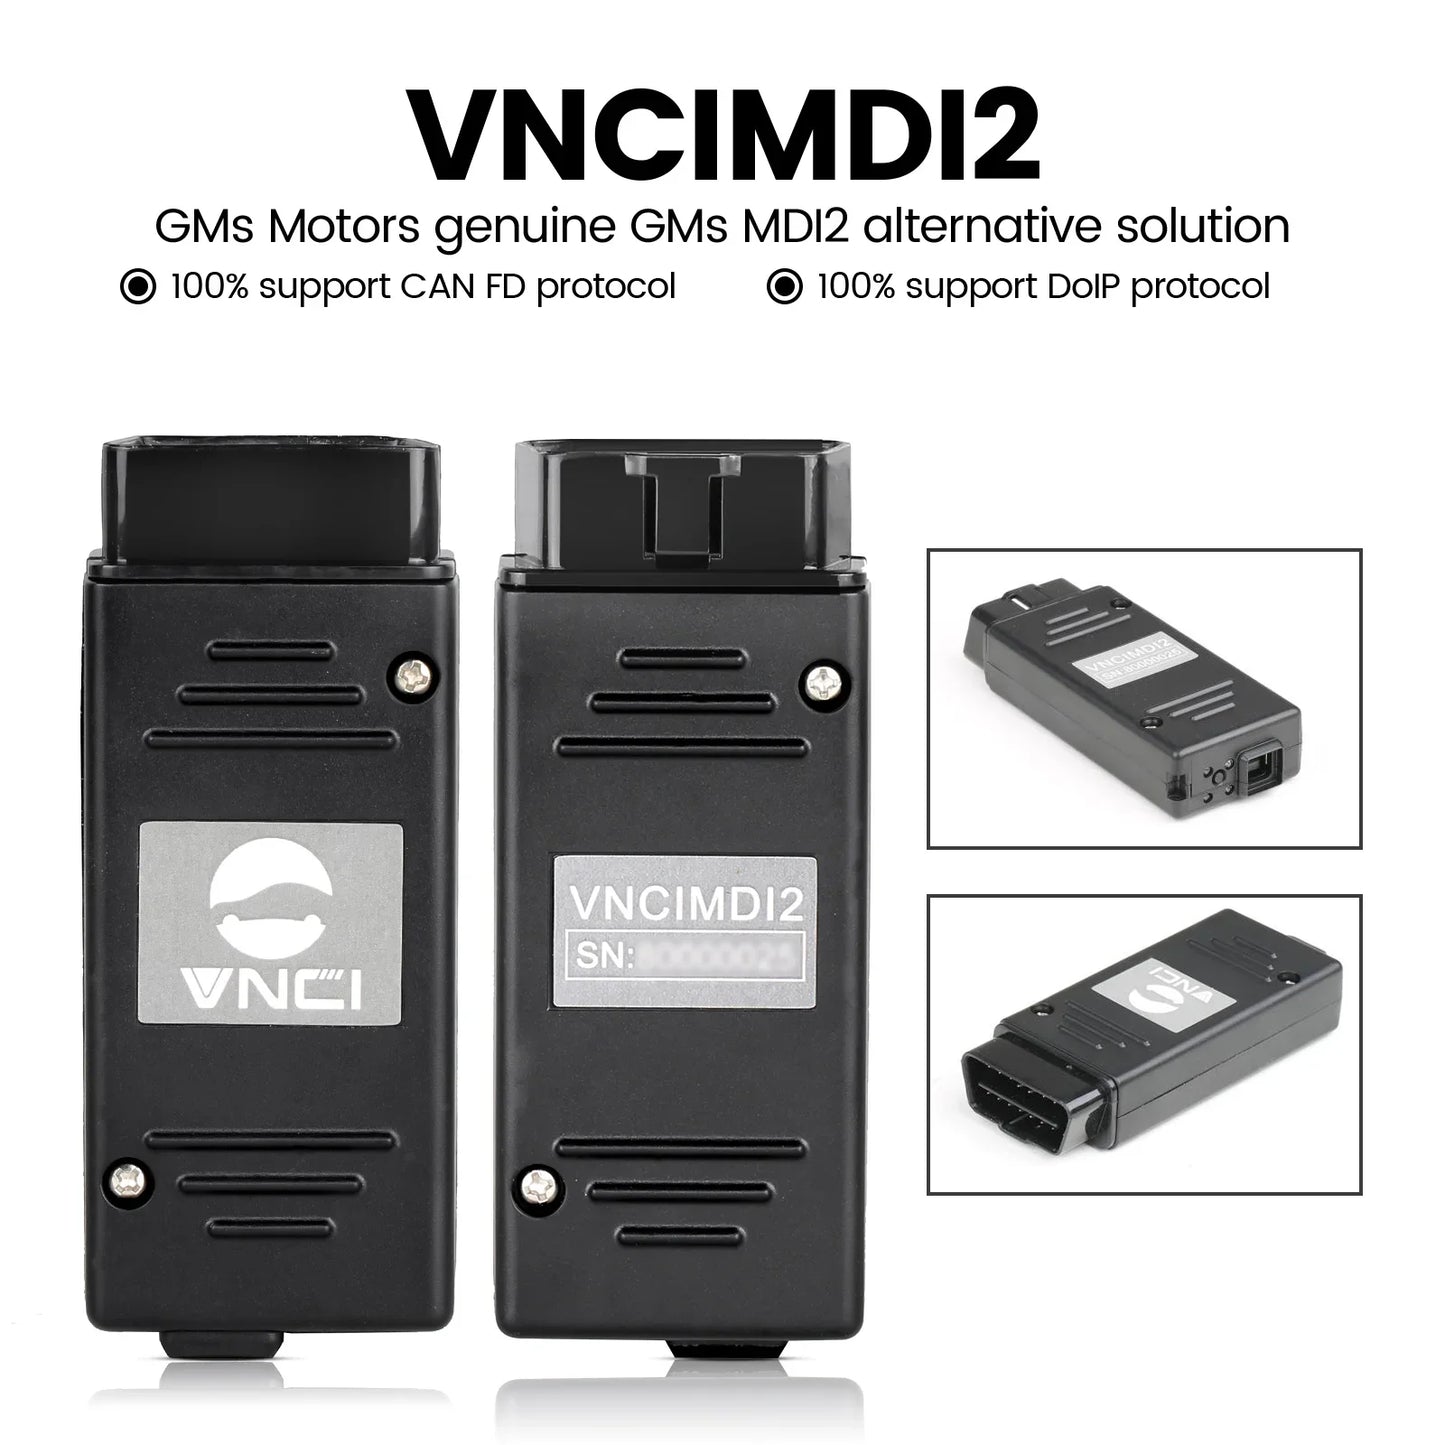 VNCI MDI2 Diagnostic Interface for G-M CAN FD/ DoIP Compatible with TLC/GDS2/ DPS/Tech win Offline Software